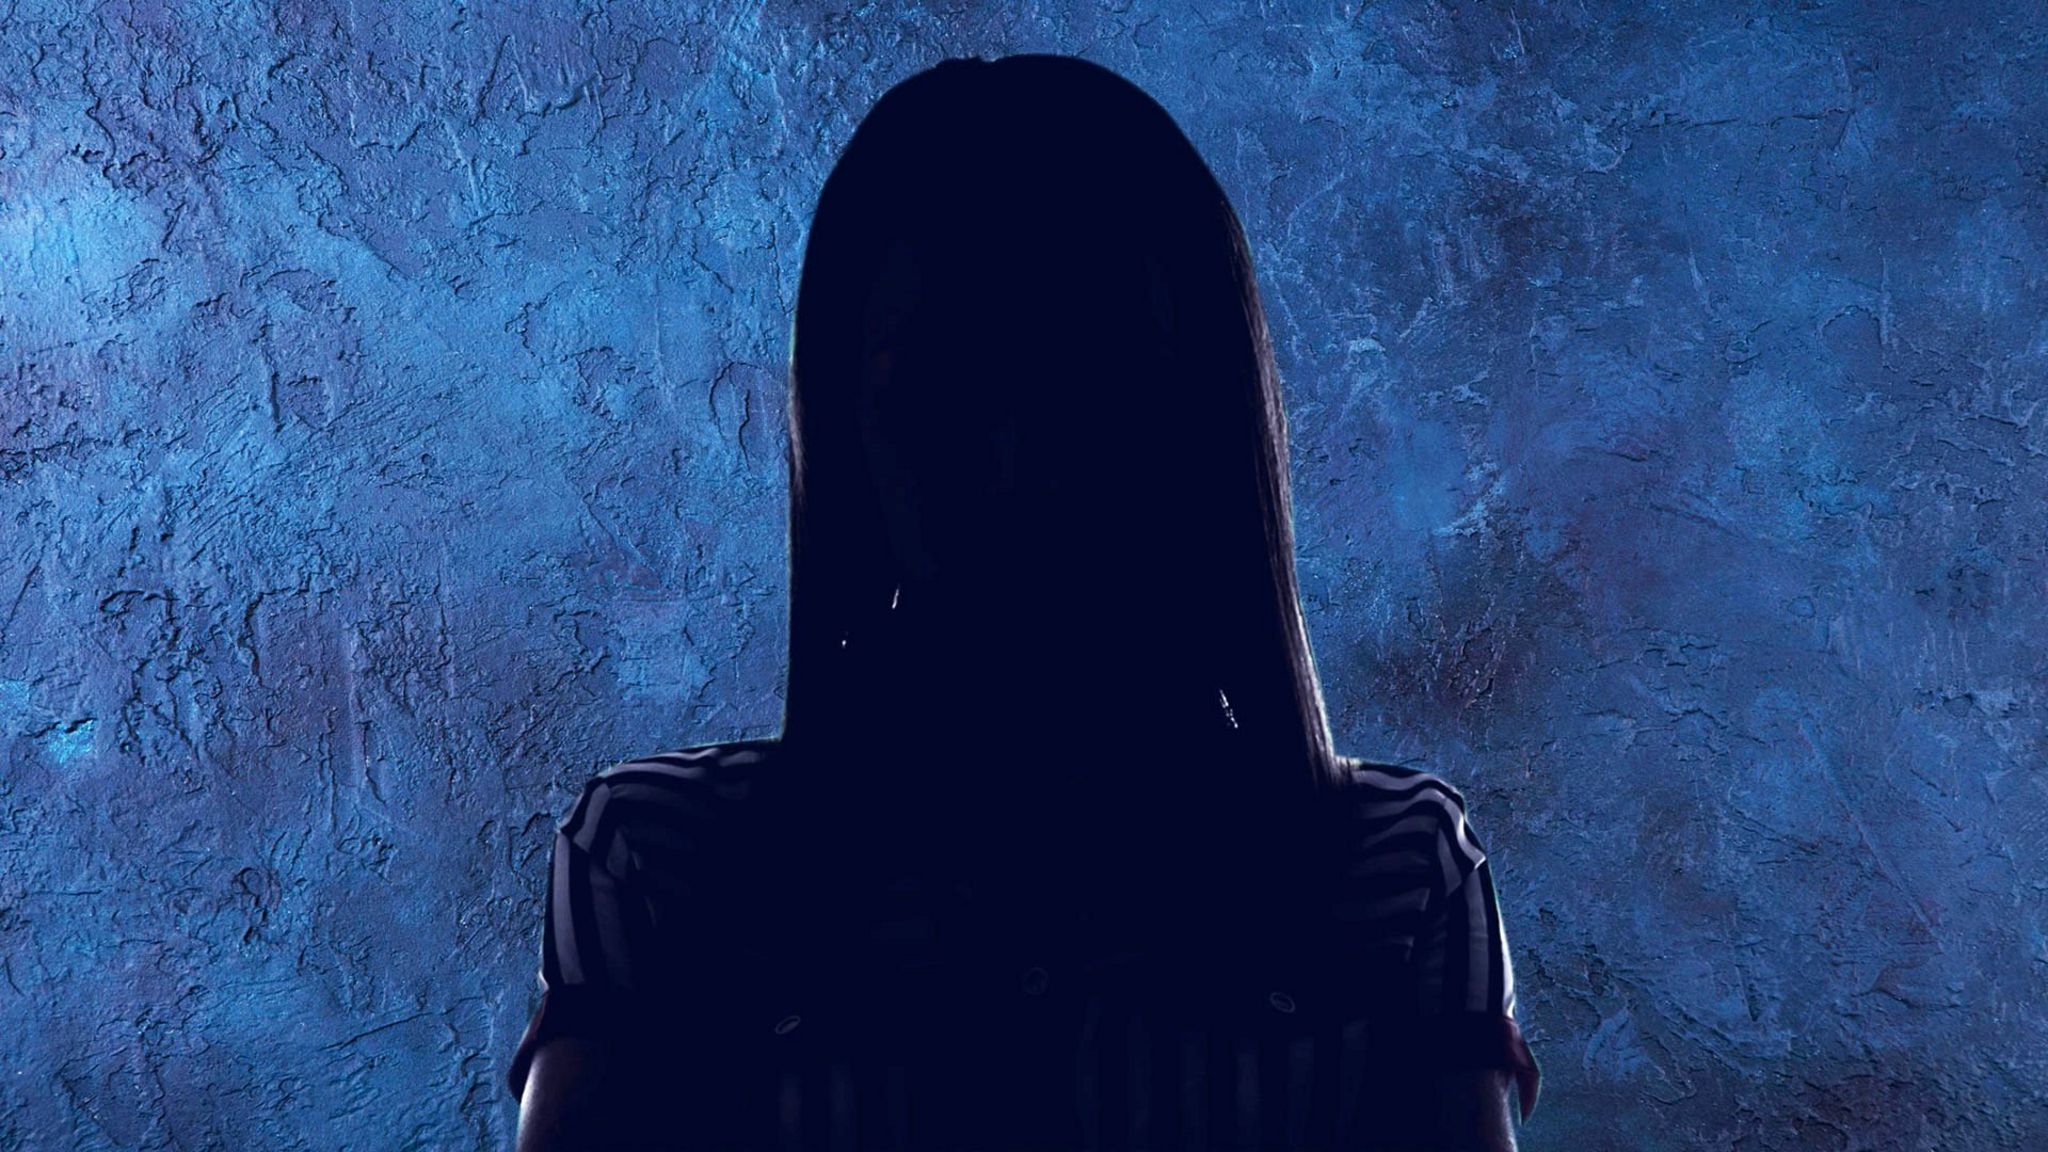 Silhouette of a woman with a blue background - the woman is not "Catherine"